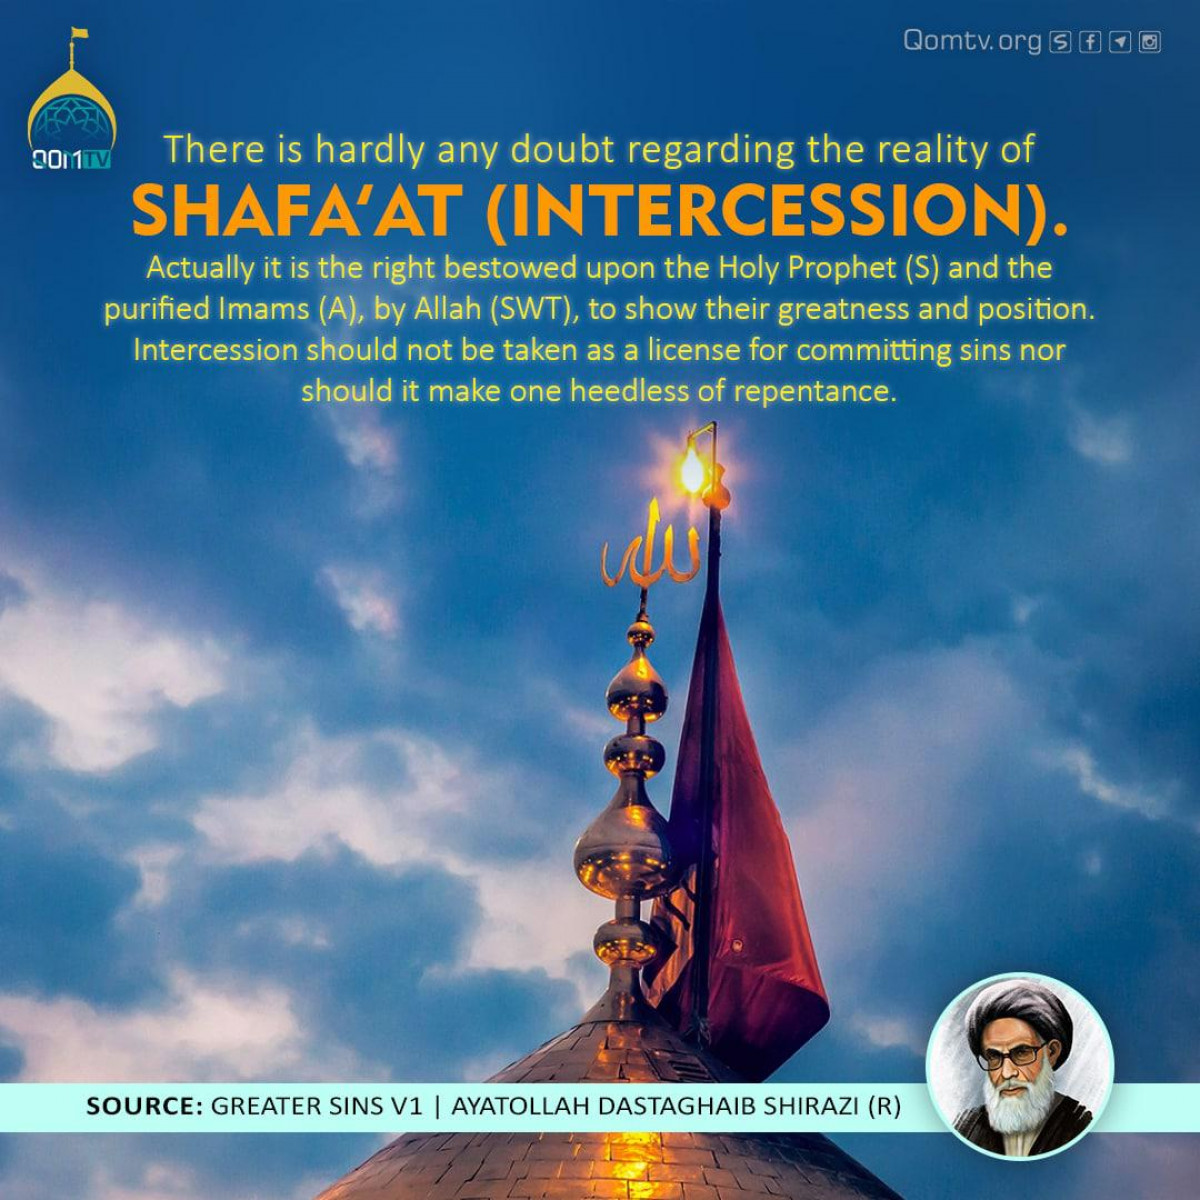 There is hardly any doubt regarding the reality of Shafa’at (intercession)